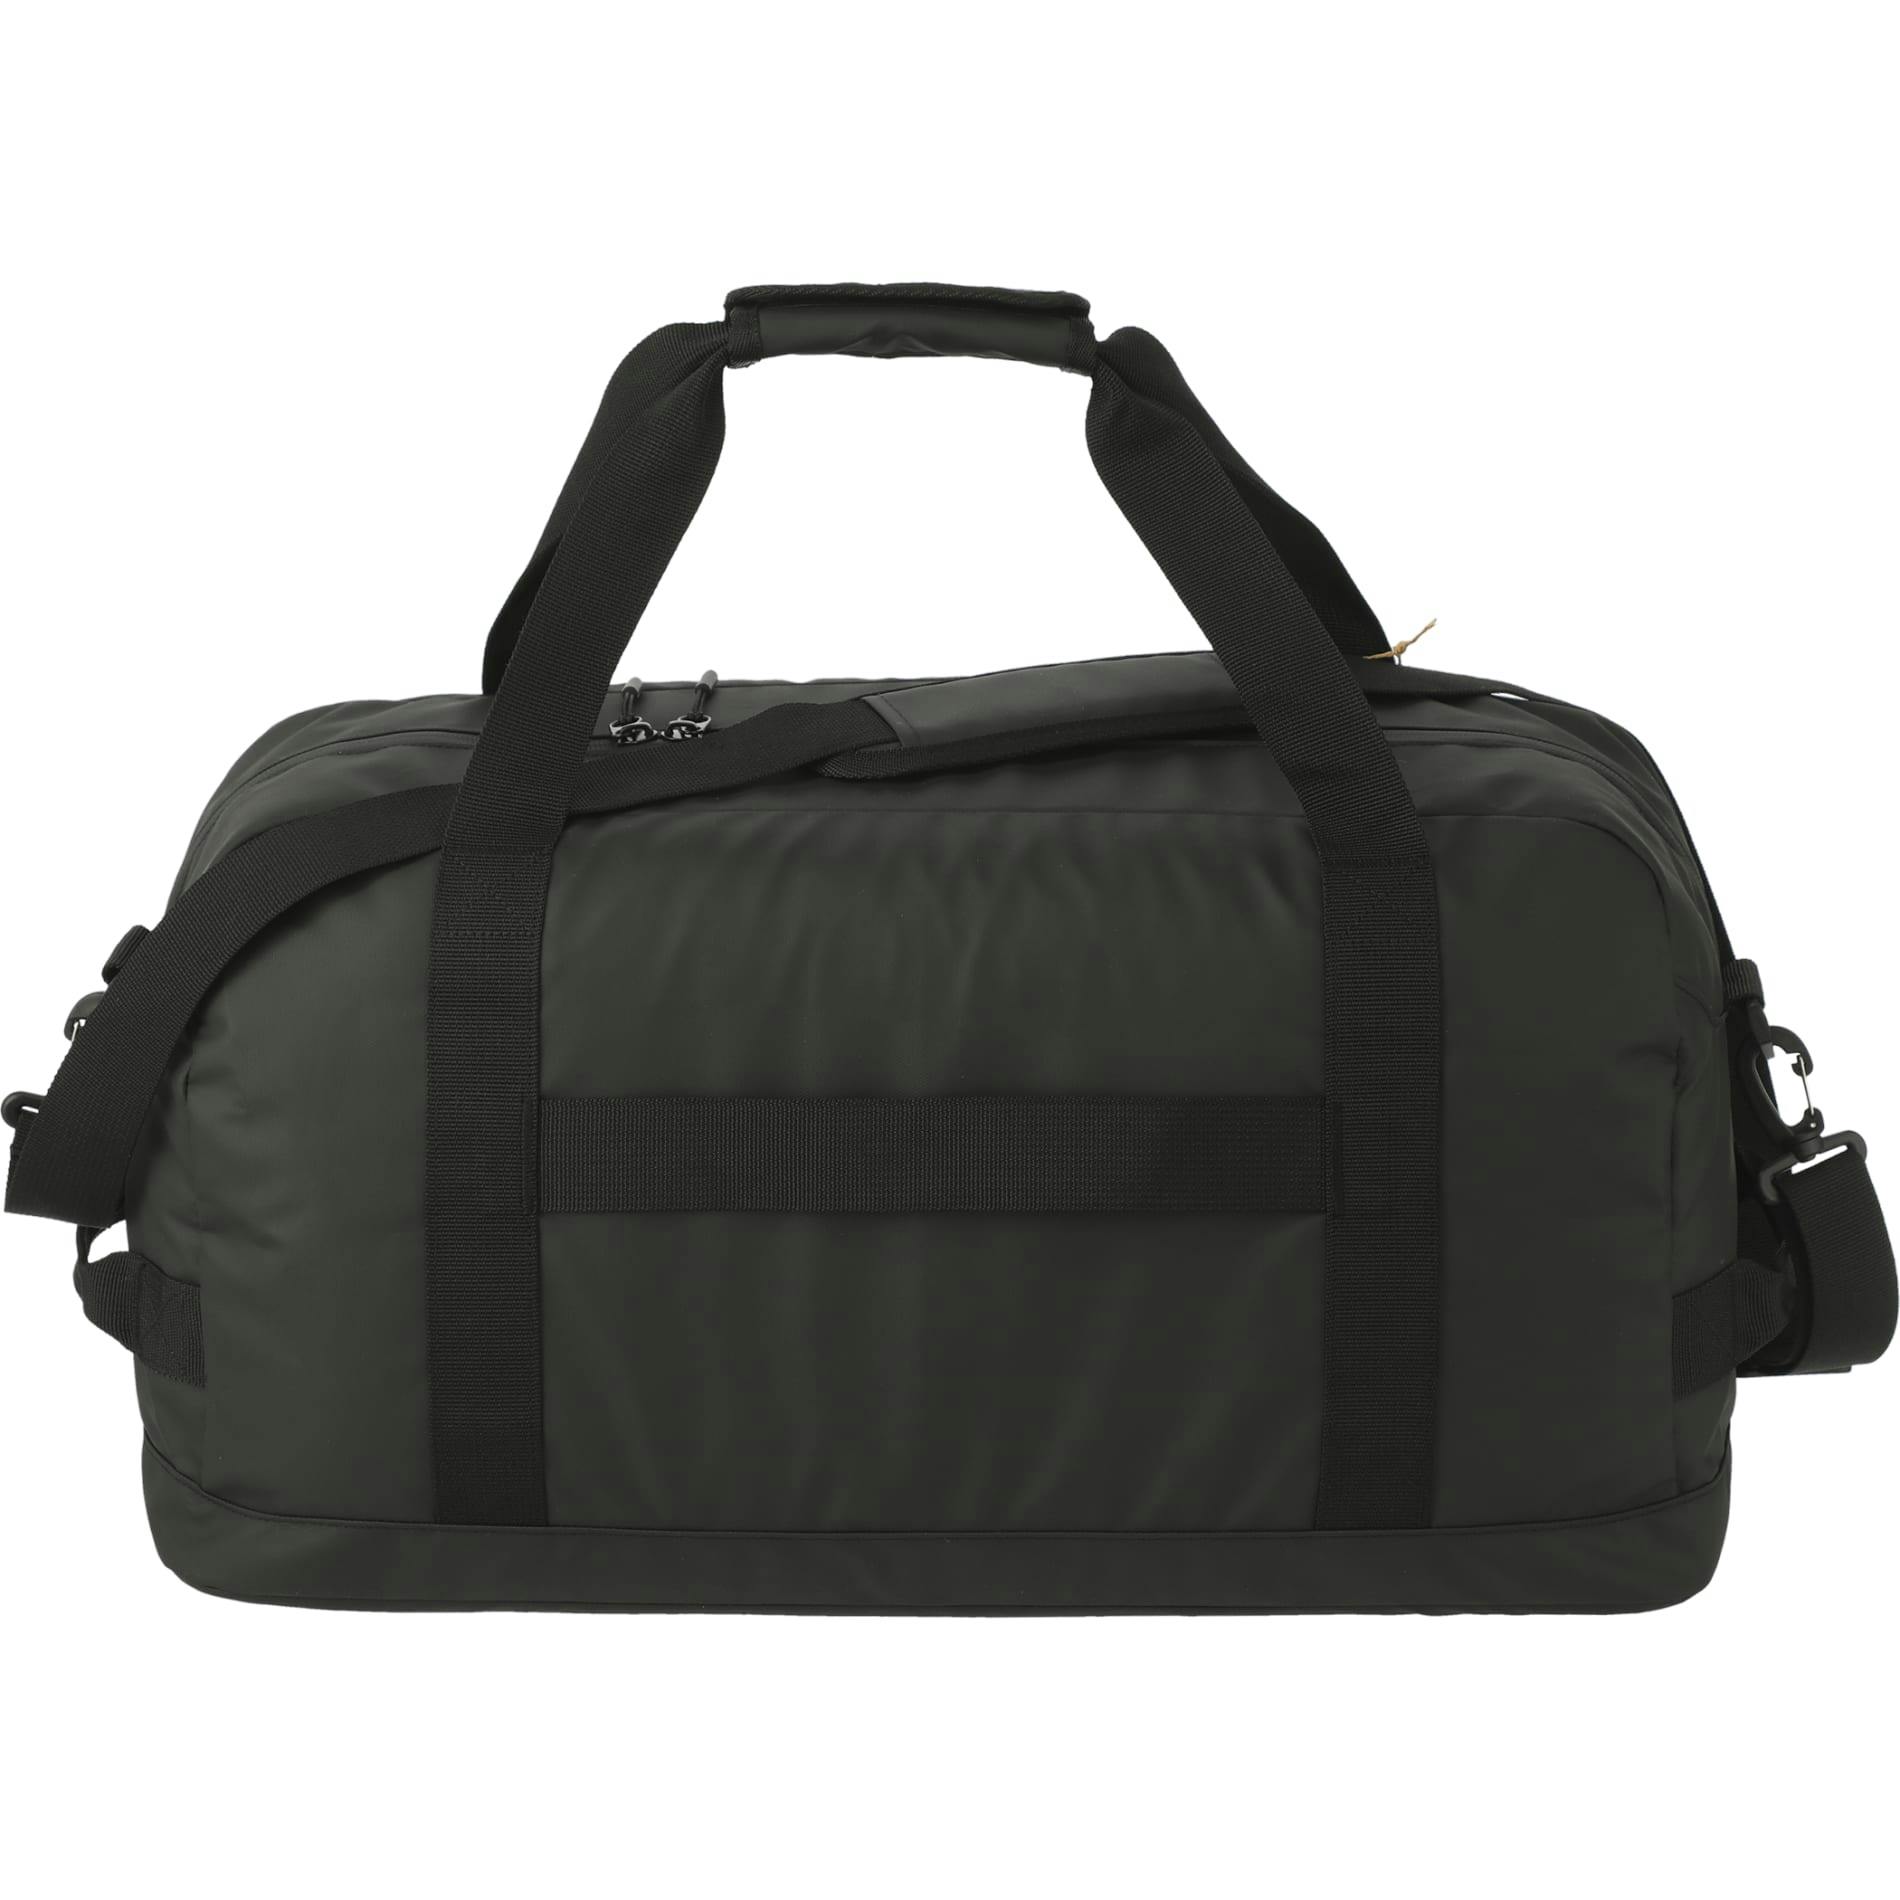 NBN All-Weather Recycled Duffel - additional Image 4